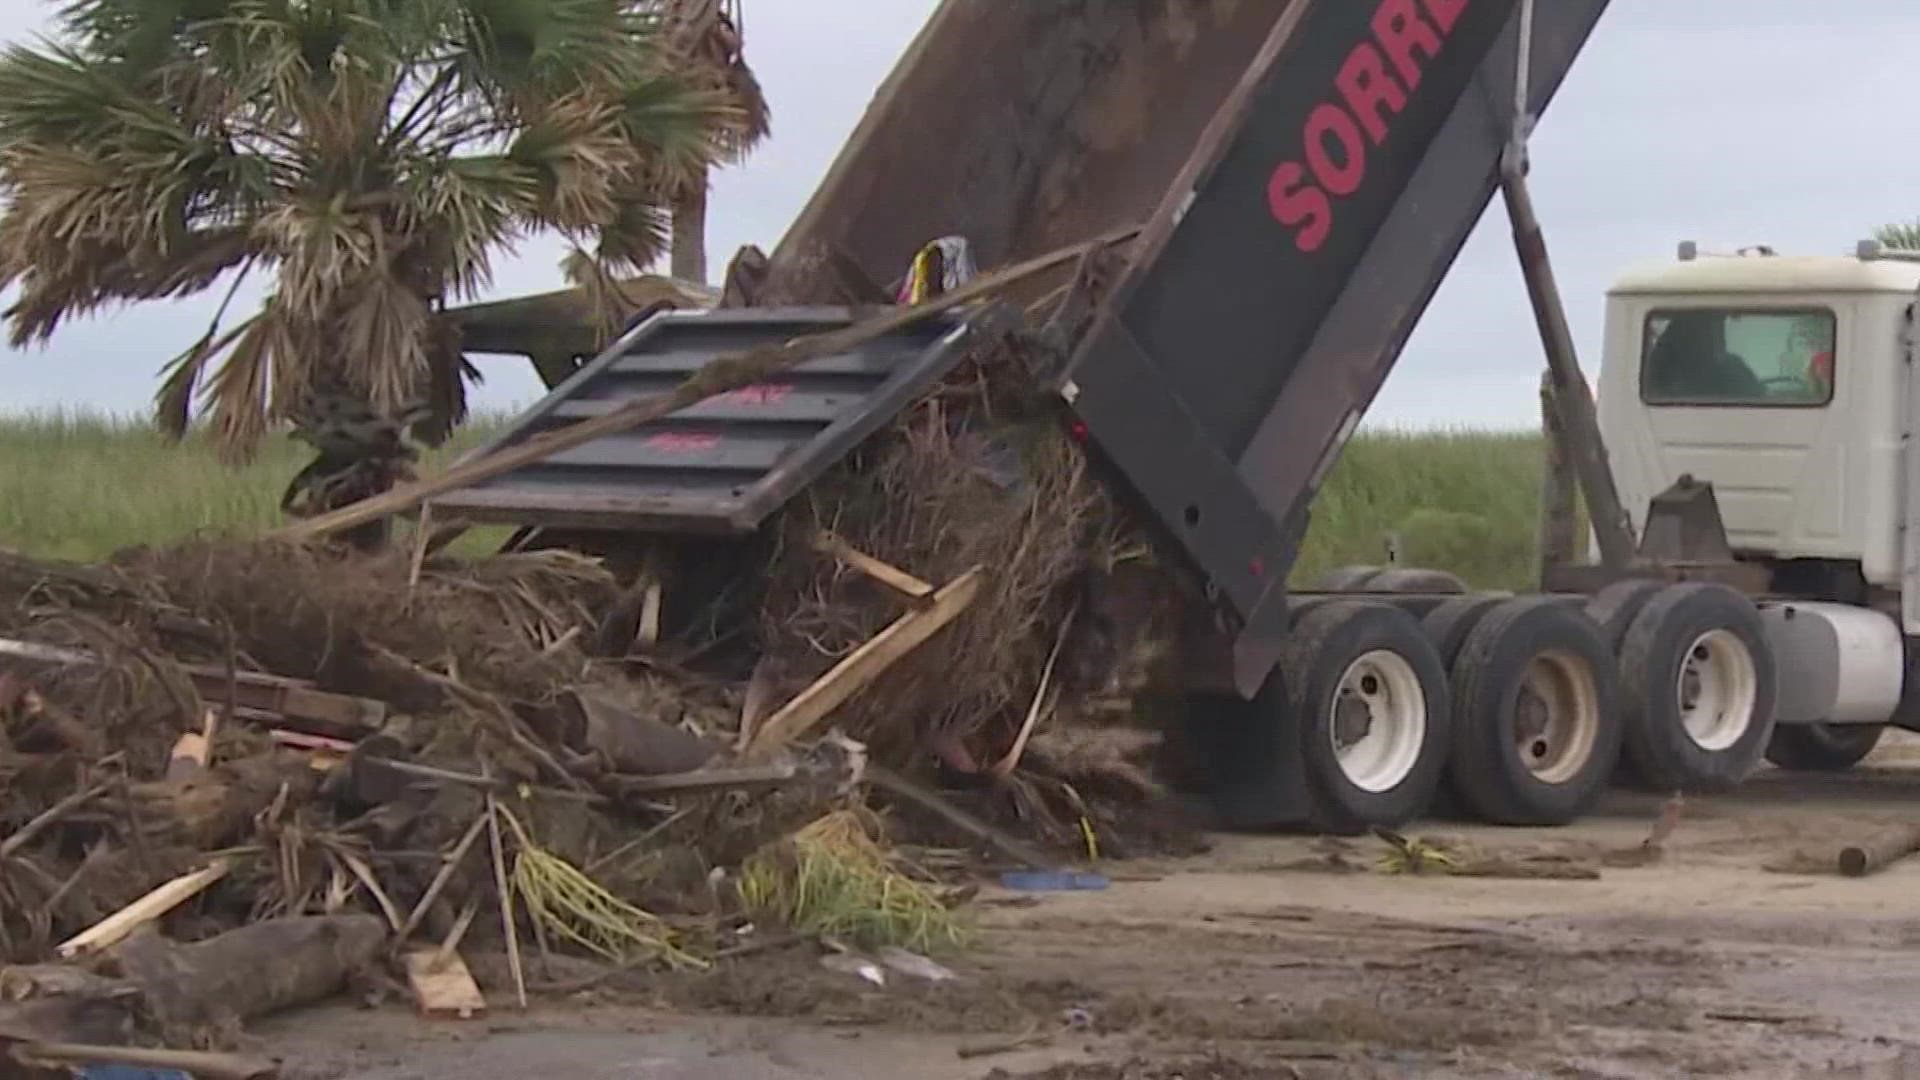 Those who rode out the storm said they’re glad their community doesn’t look any worse, but Surfside Beach residents are not thrilled about having no water or power.